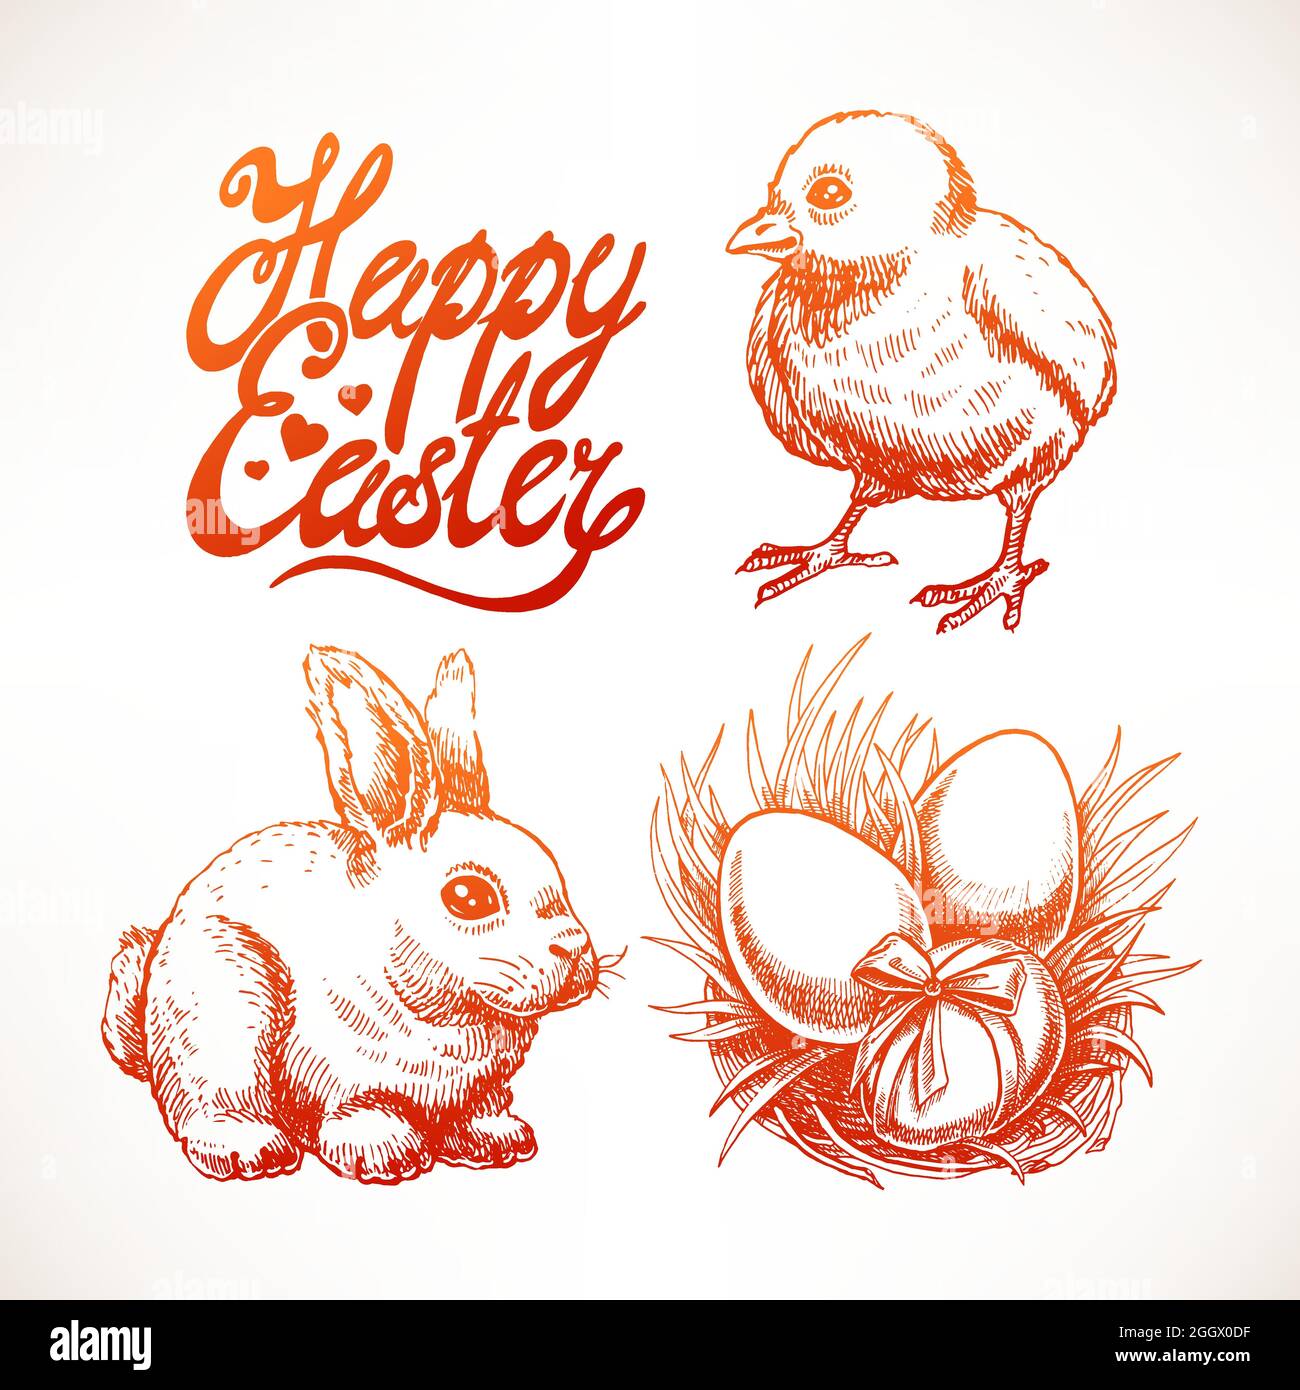 Premium Vector | Happy easter greeting card in sketch style.